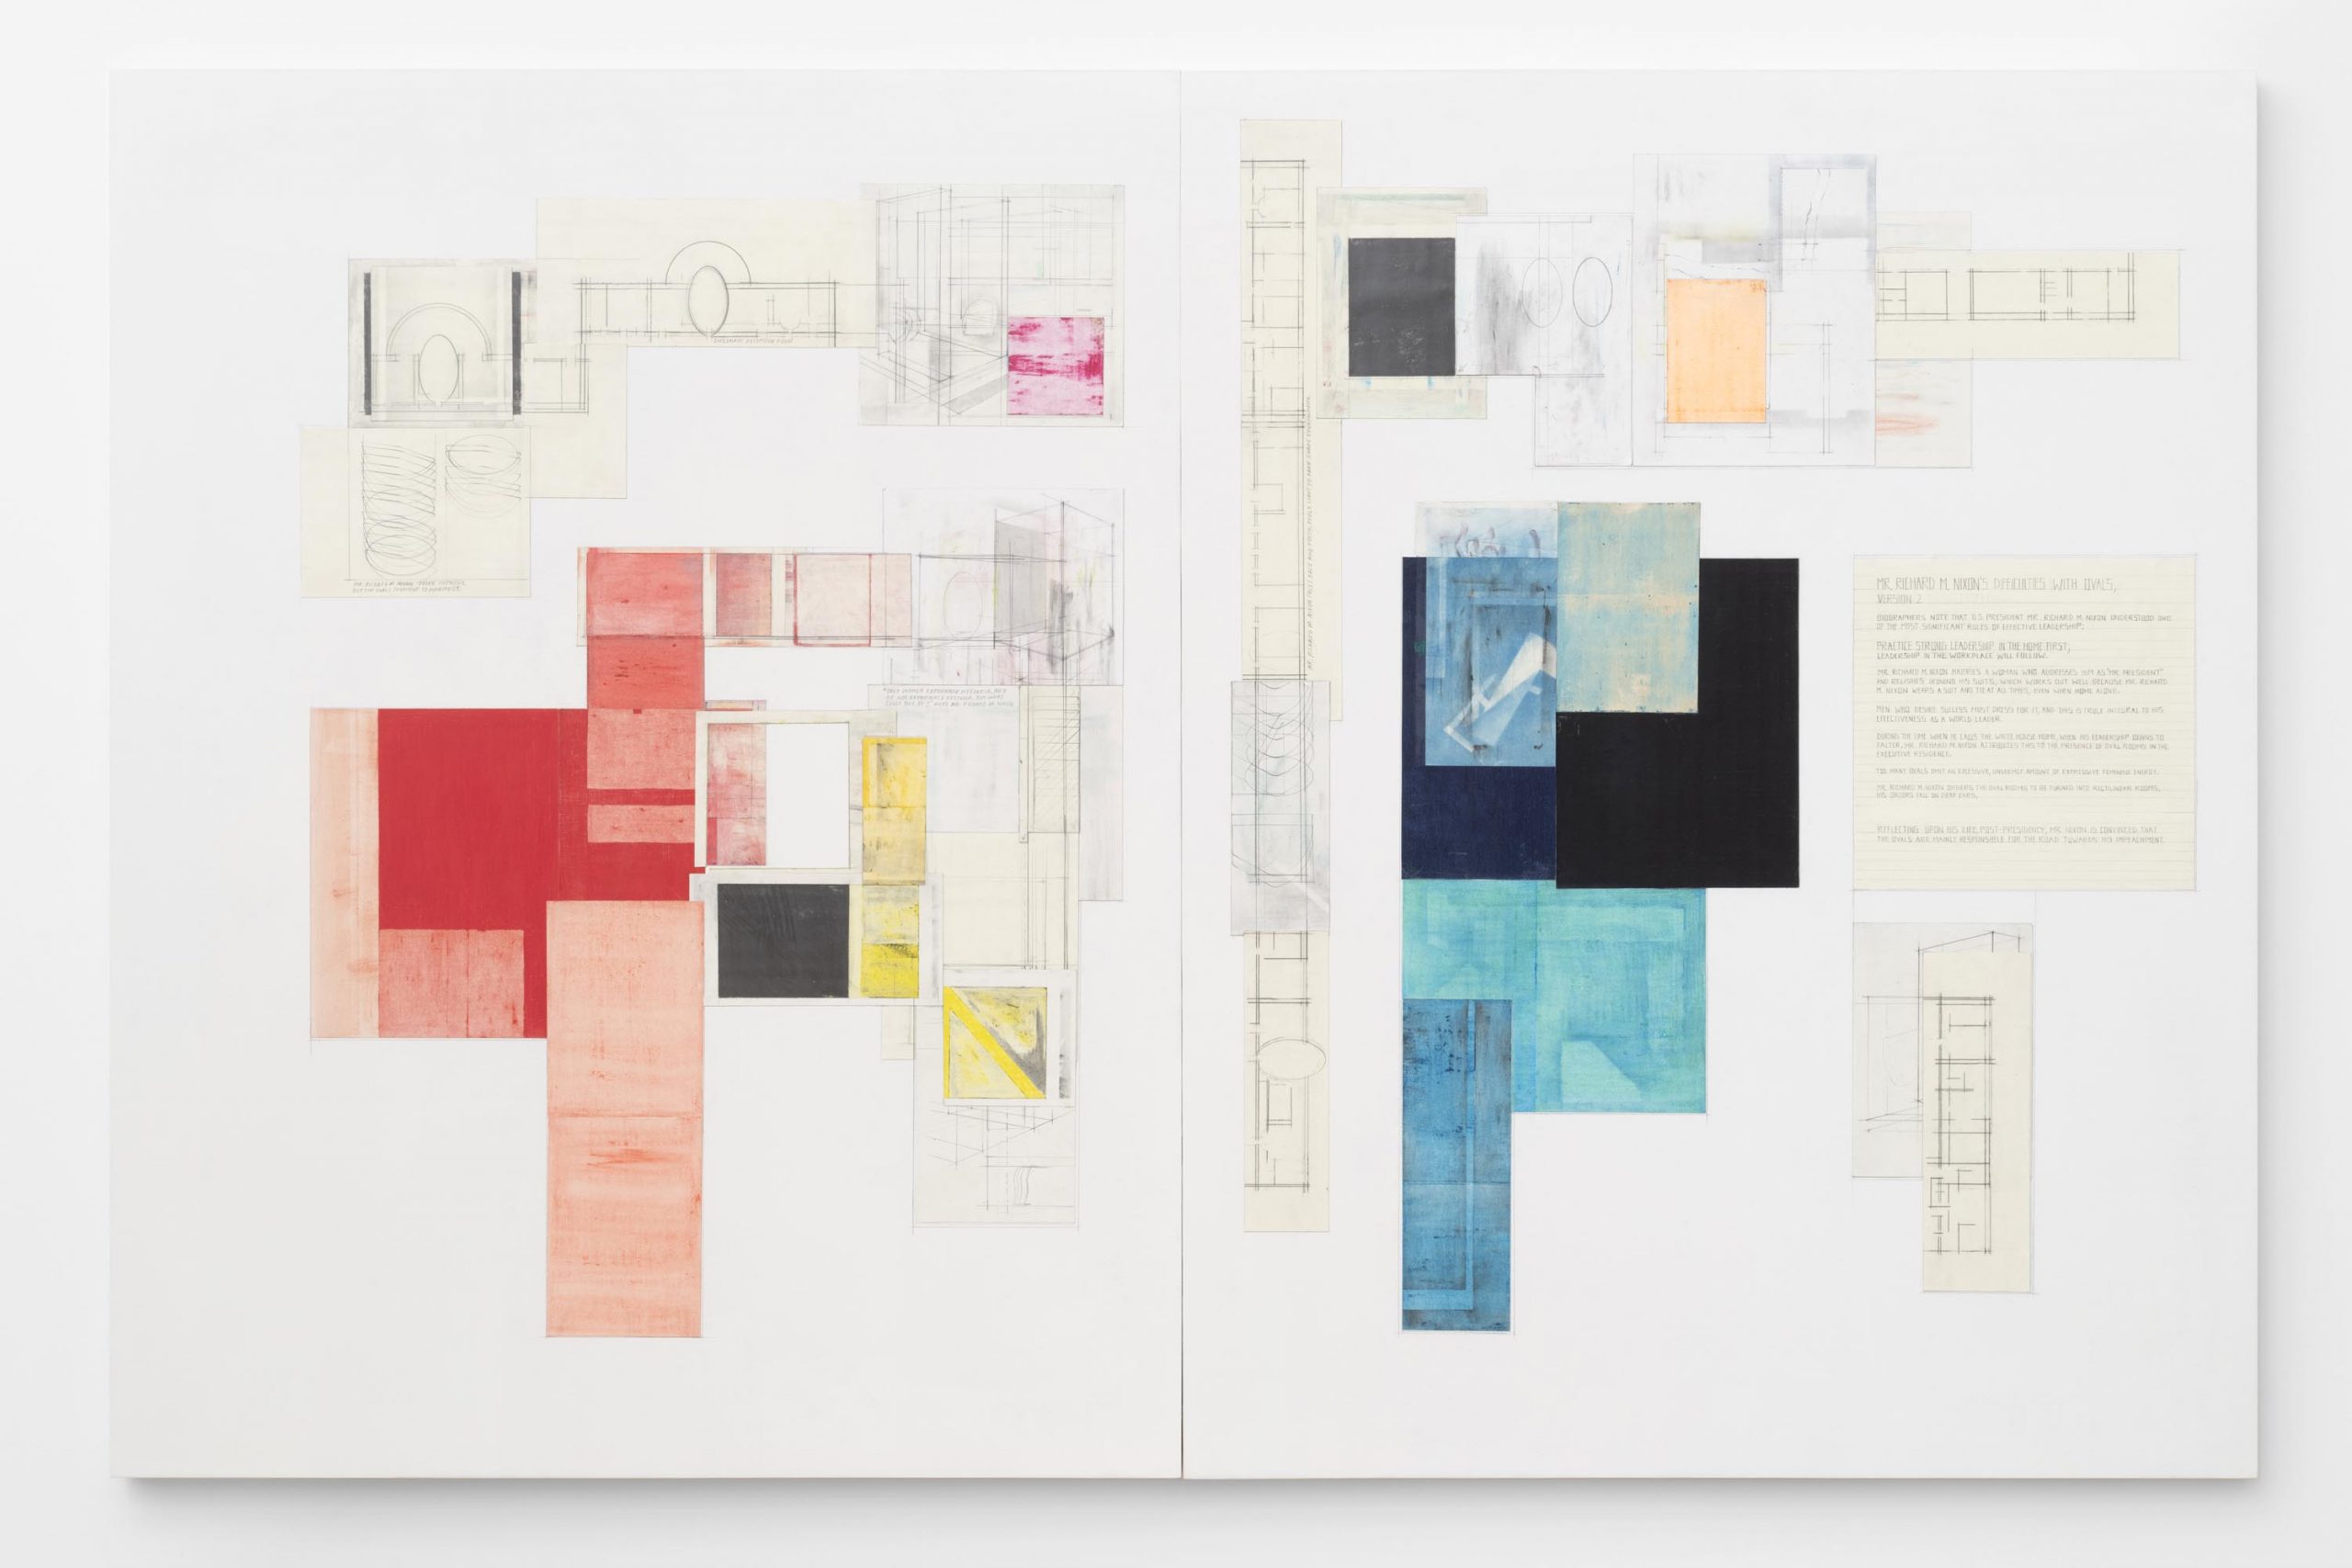 Mr. Richard M. Nixon’s Difficulties with Ovals, Version 2 , 2019, graphite, crayon, colored pencil, pastel and collage on panel. Diptych: 50 x 76 x 1.5 inches